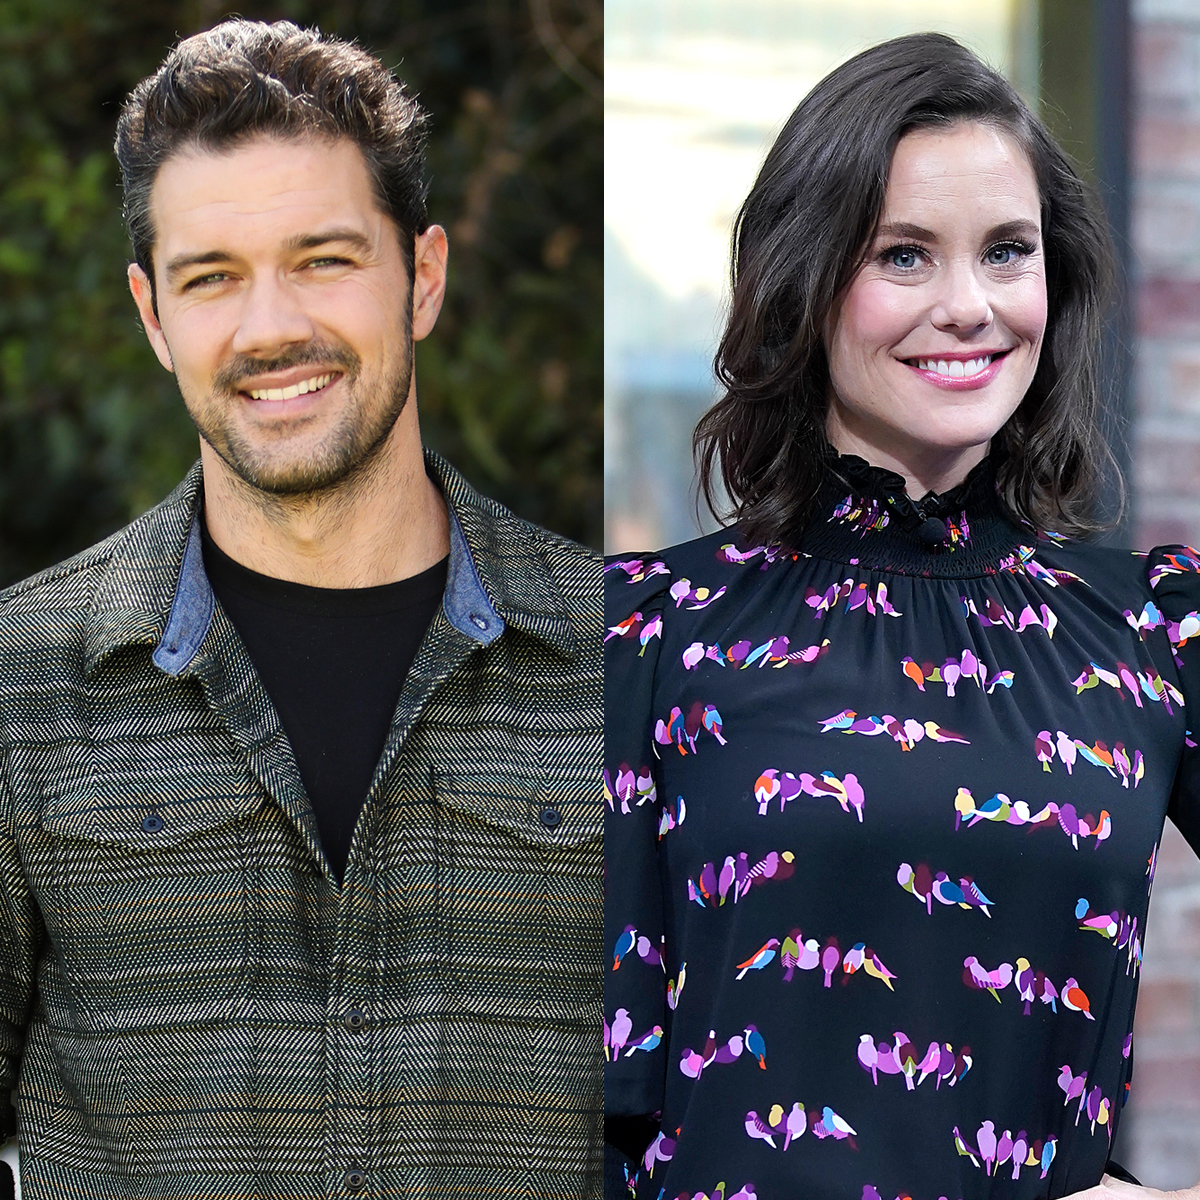 Ashley Williams, Ryan Paevey to Star in Hallmark's Two Tickets to